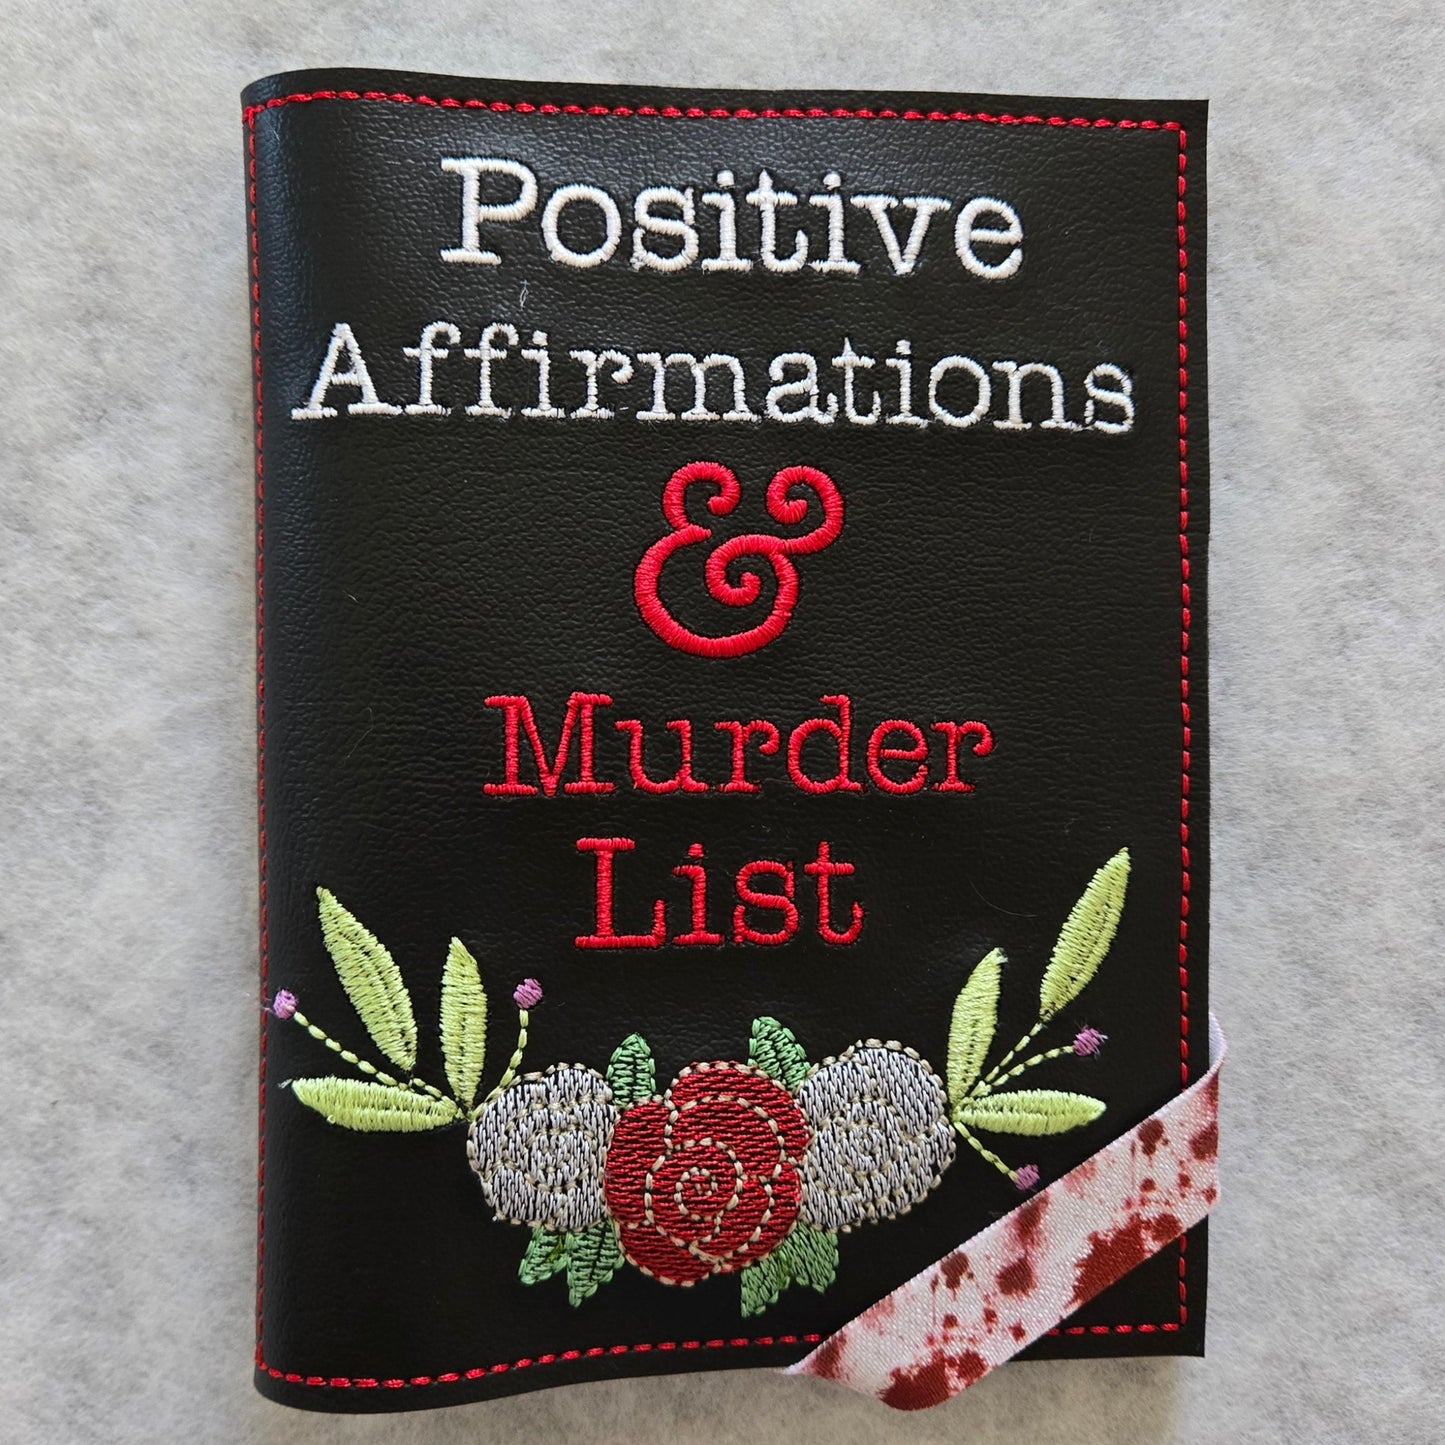 Positive Affirmations & Murder List Embroidered Notebook Cover